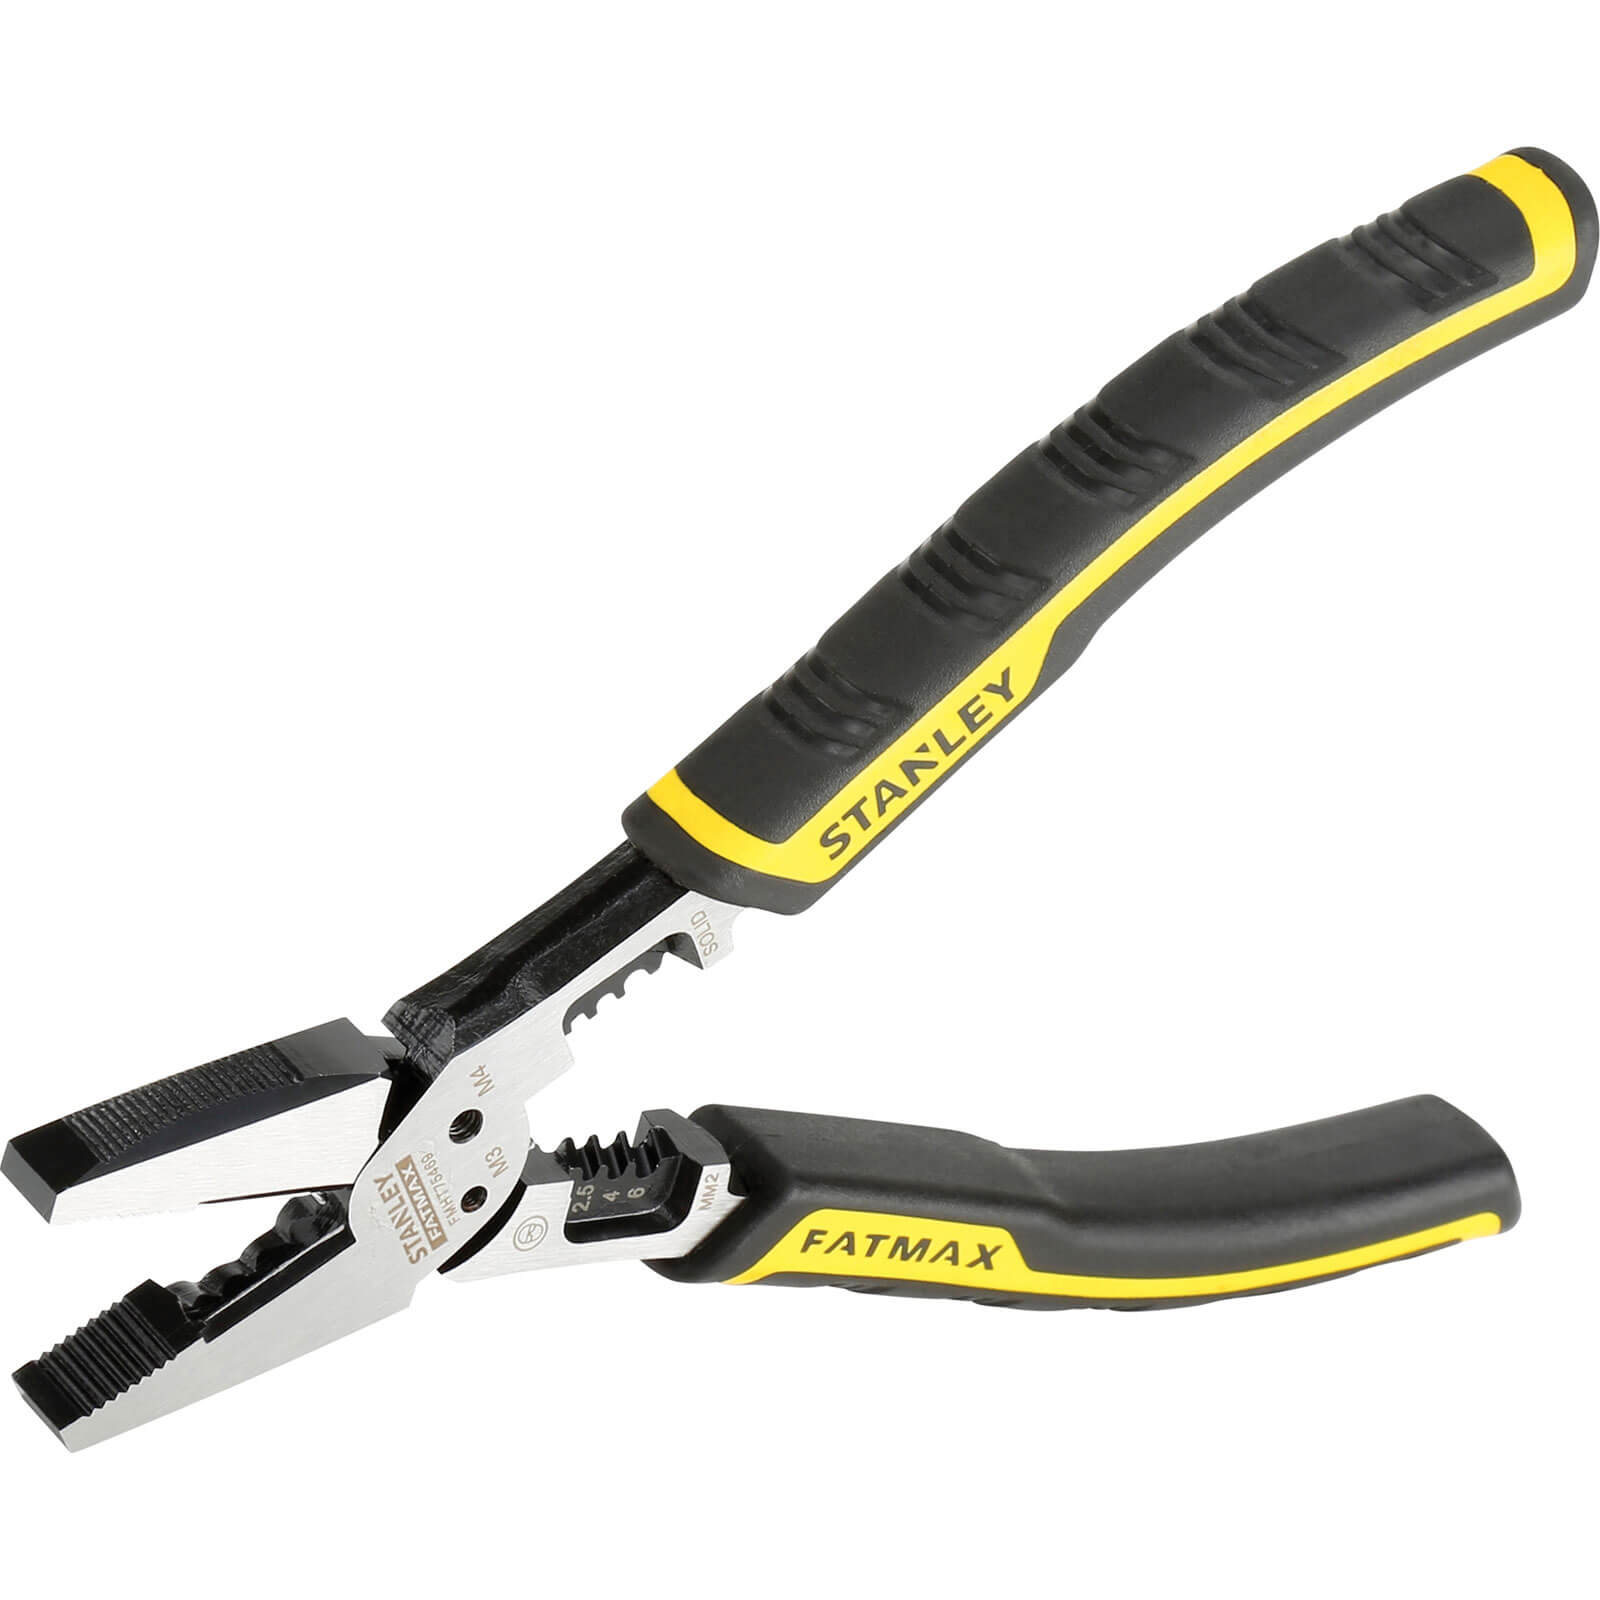 Image of Stanley FatMax 6 in 1 Combination Pliers 200mm